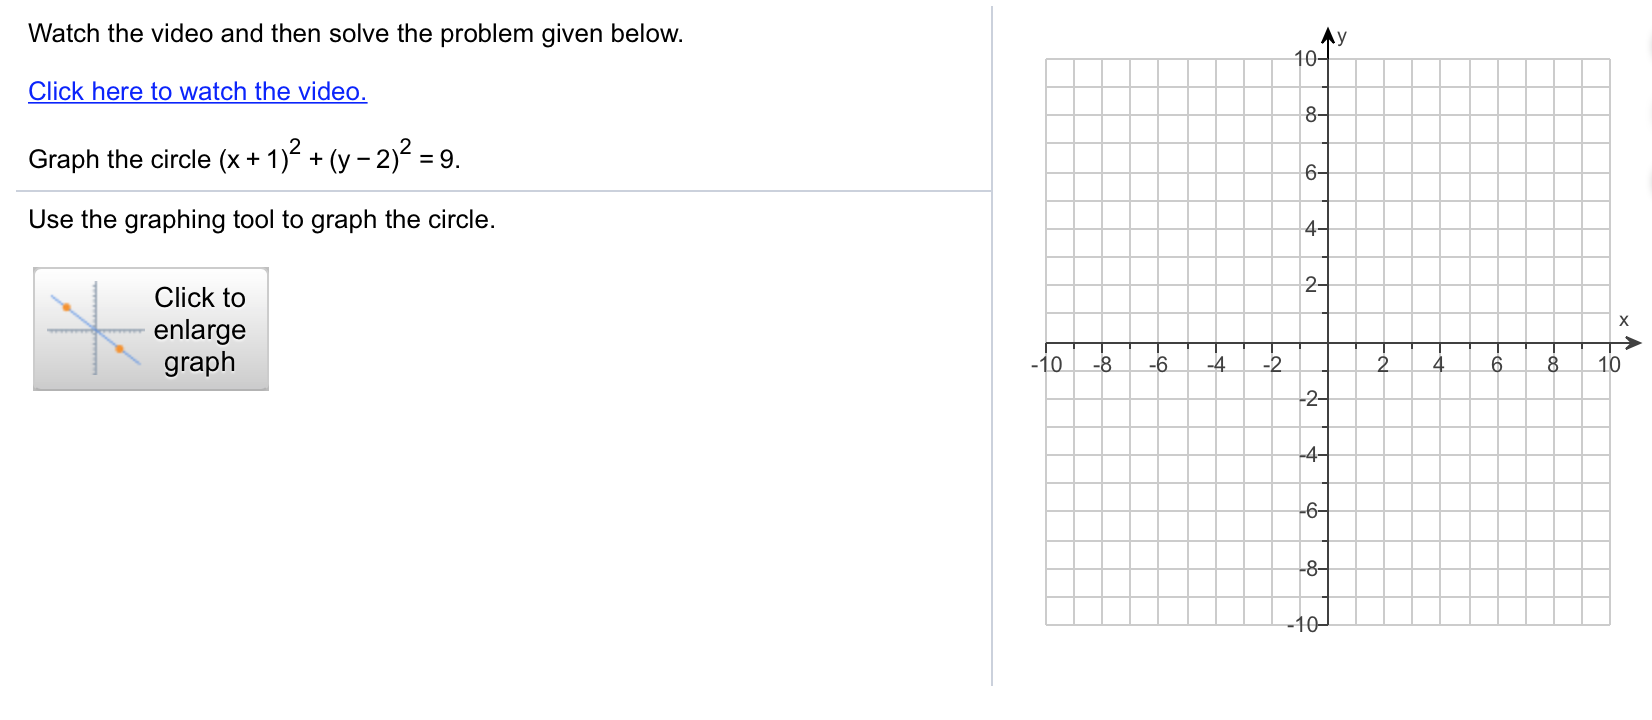 Watch the video and then solve the problem given below.
Click here to watch the video.
Graph the circle (x+1)2(y-2)2-9.
Use the graphing tool to graph the circle.
4
2
Click to
enlarge
graph
0
-4
10
2
8
